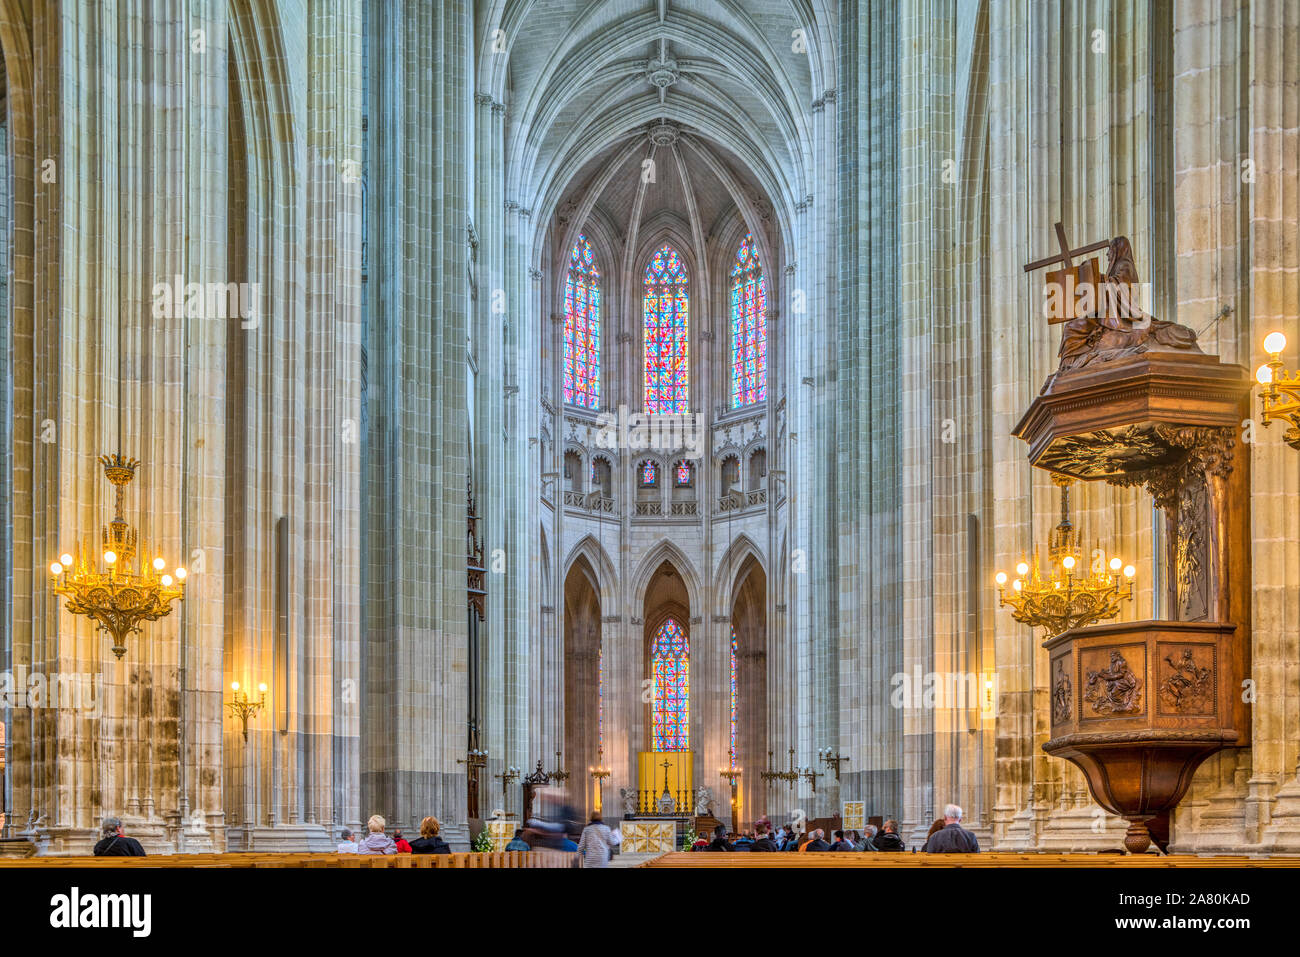 Interior of the Cathedral of St. Peter and St. Paul, Nantes, Pays de la Loire, France. Stock Photo